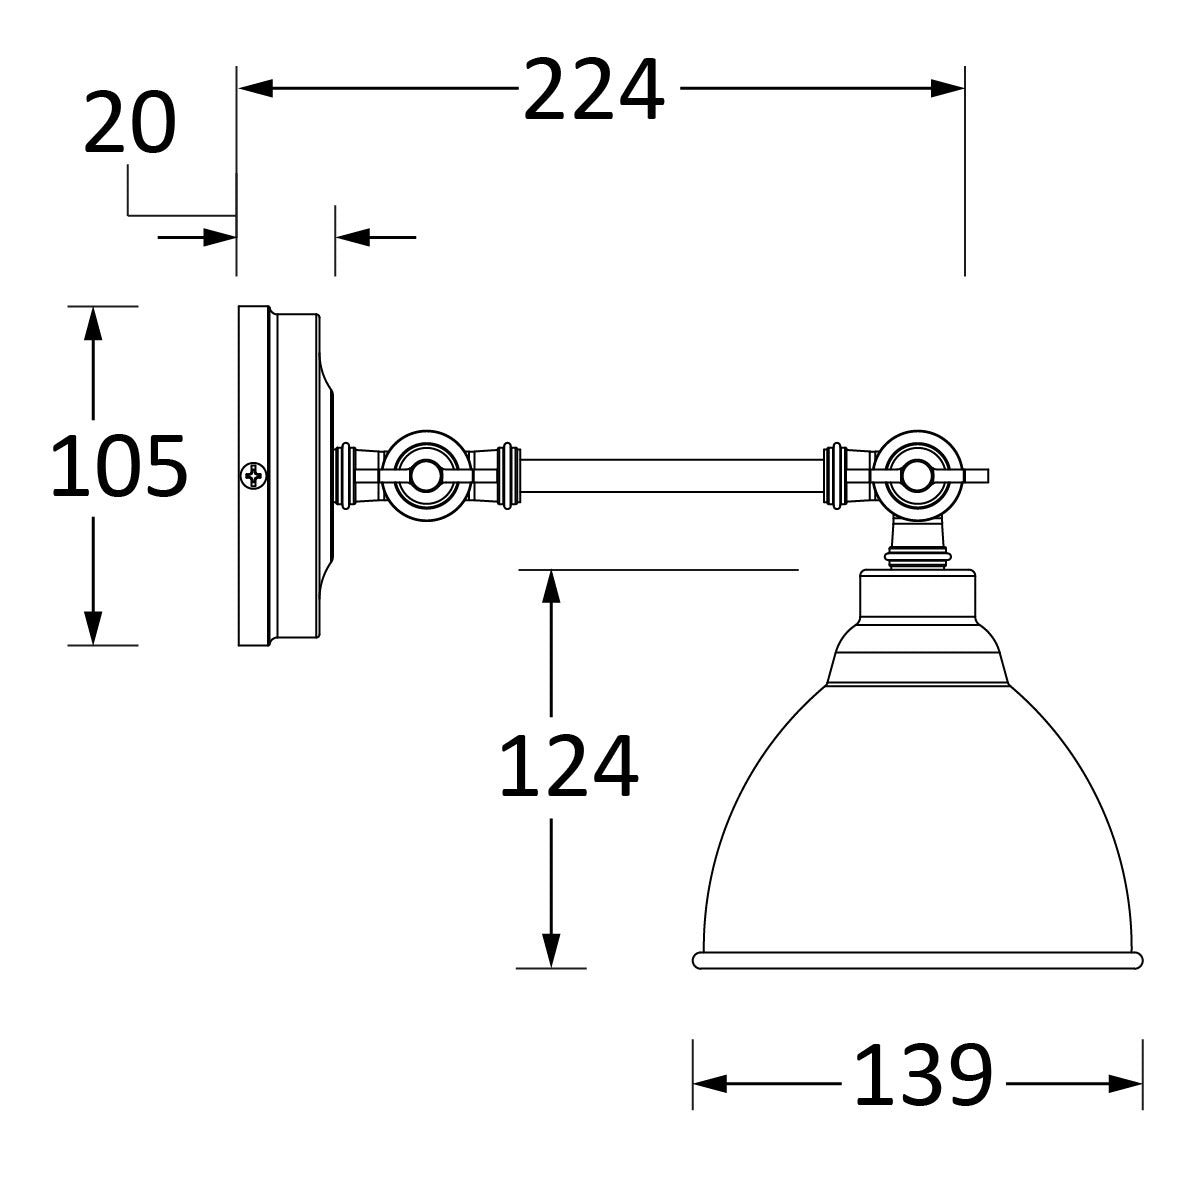 SHOW Technical Drawing of Brindley Wall Light in Dingle